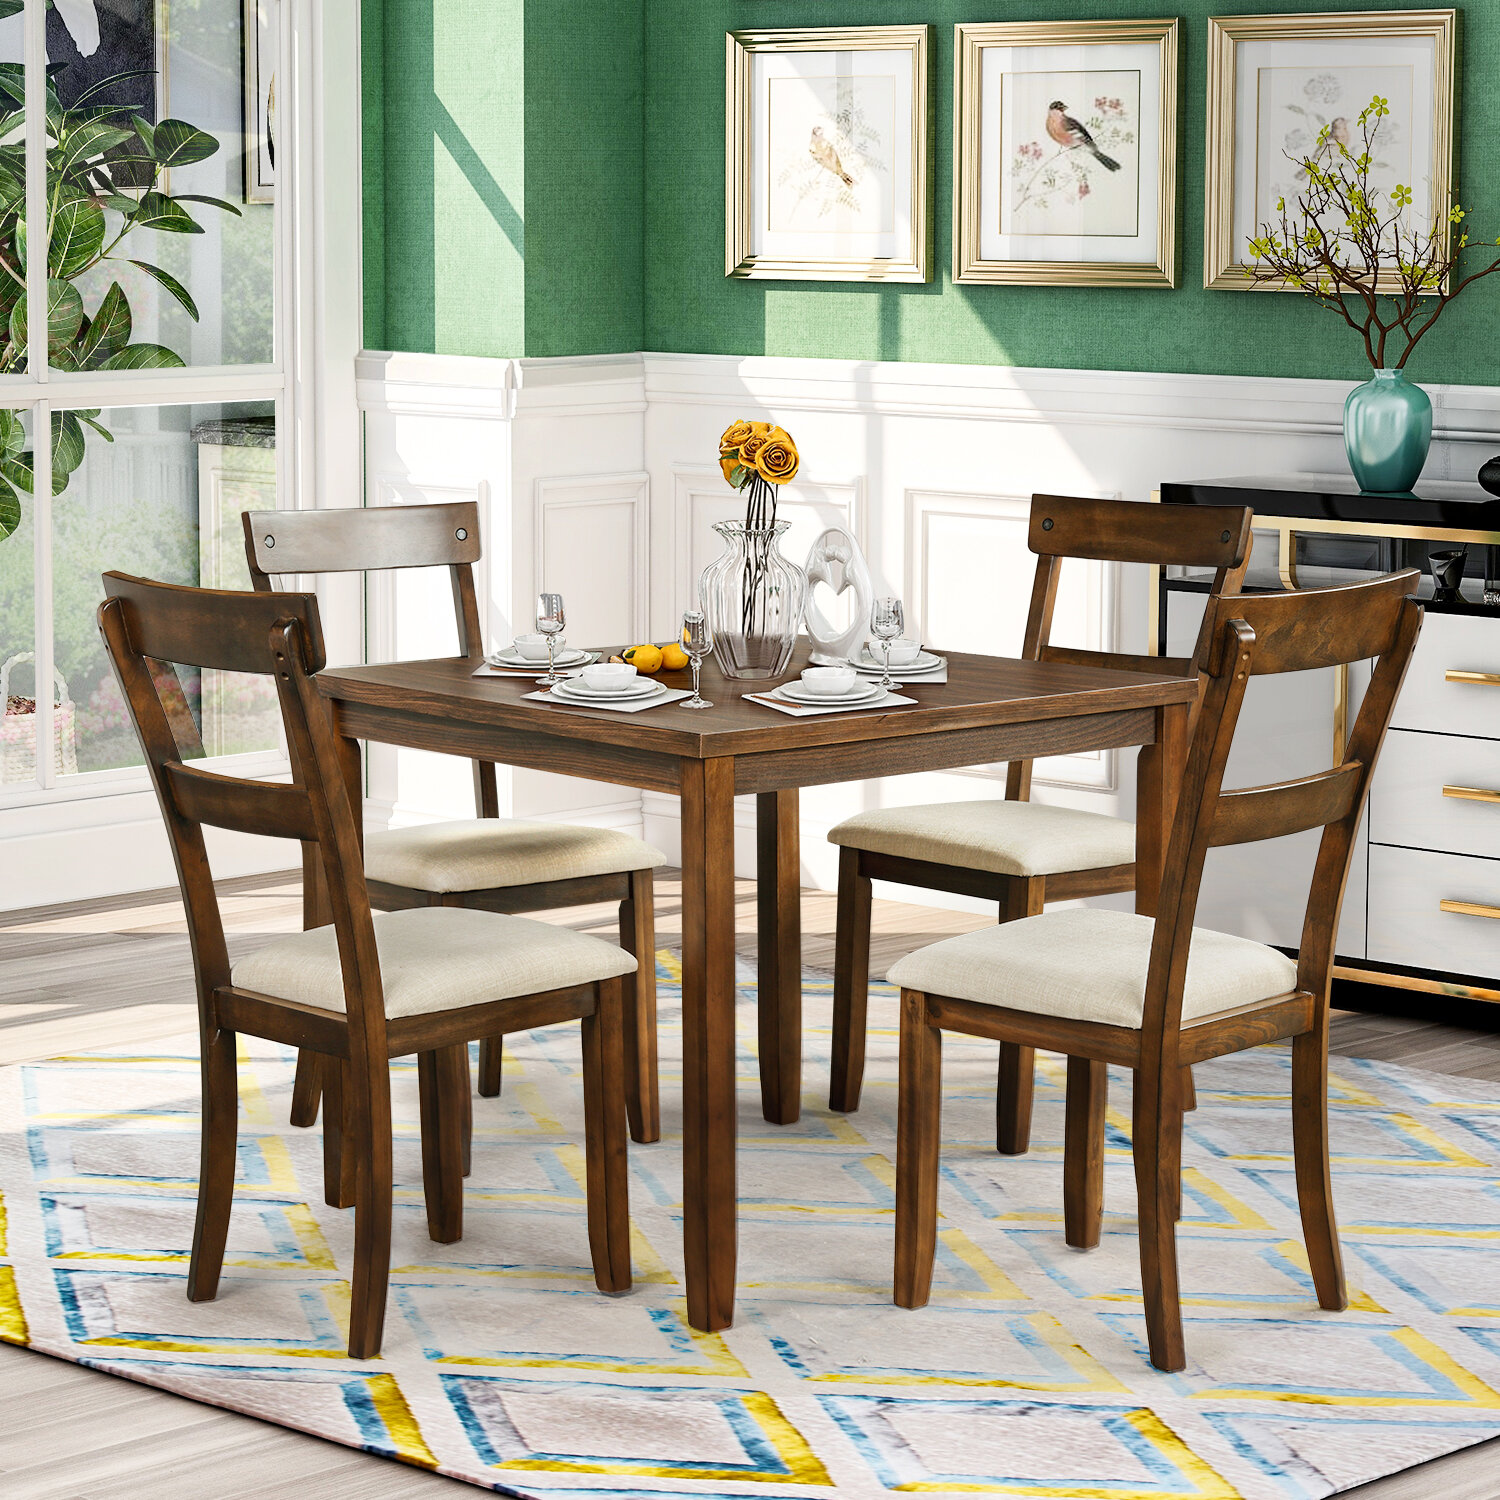 Featured image of post Industrial Kitchen Table And Chairs - Check out our industrial dining table and chairs selection for the very best in unique or custom, handmade pieces from our dining room furniture shops.